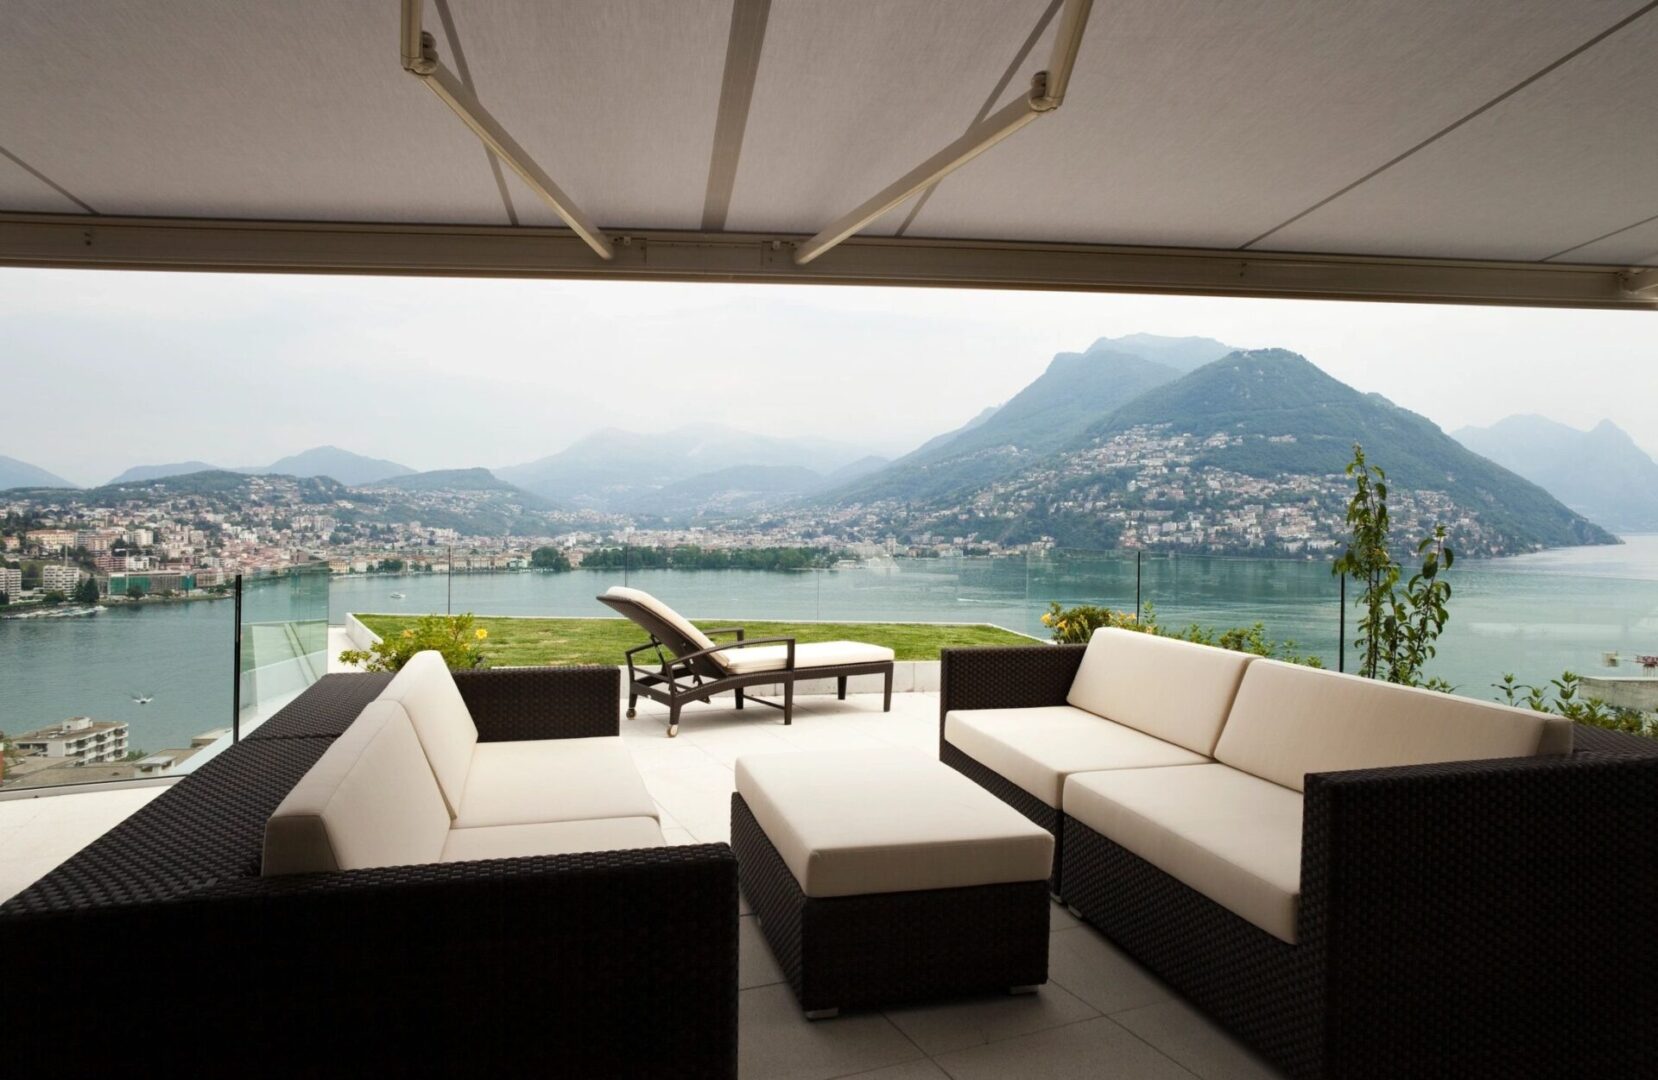 A patio with a view of the lake and mountains.